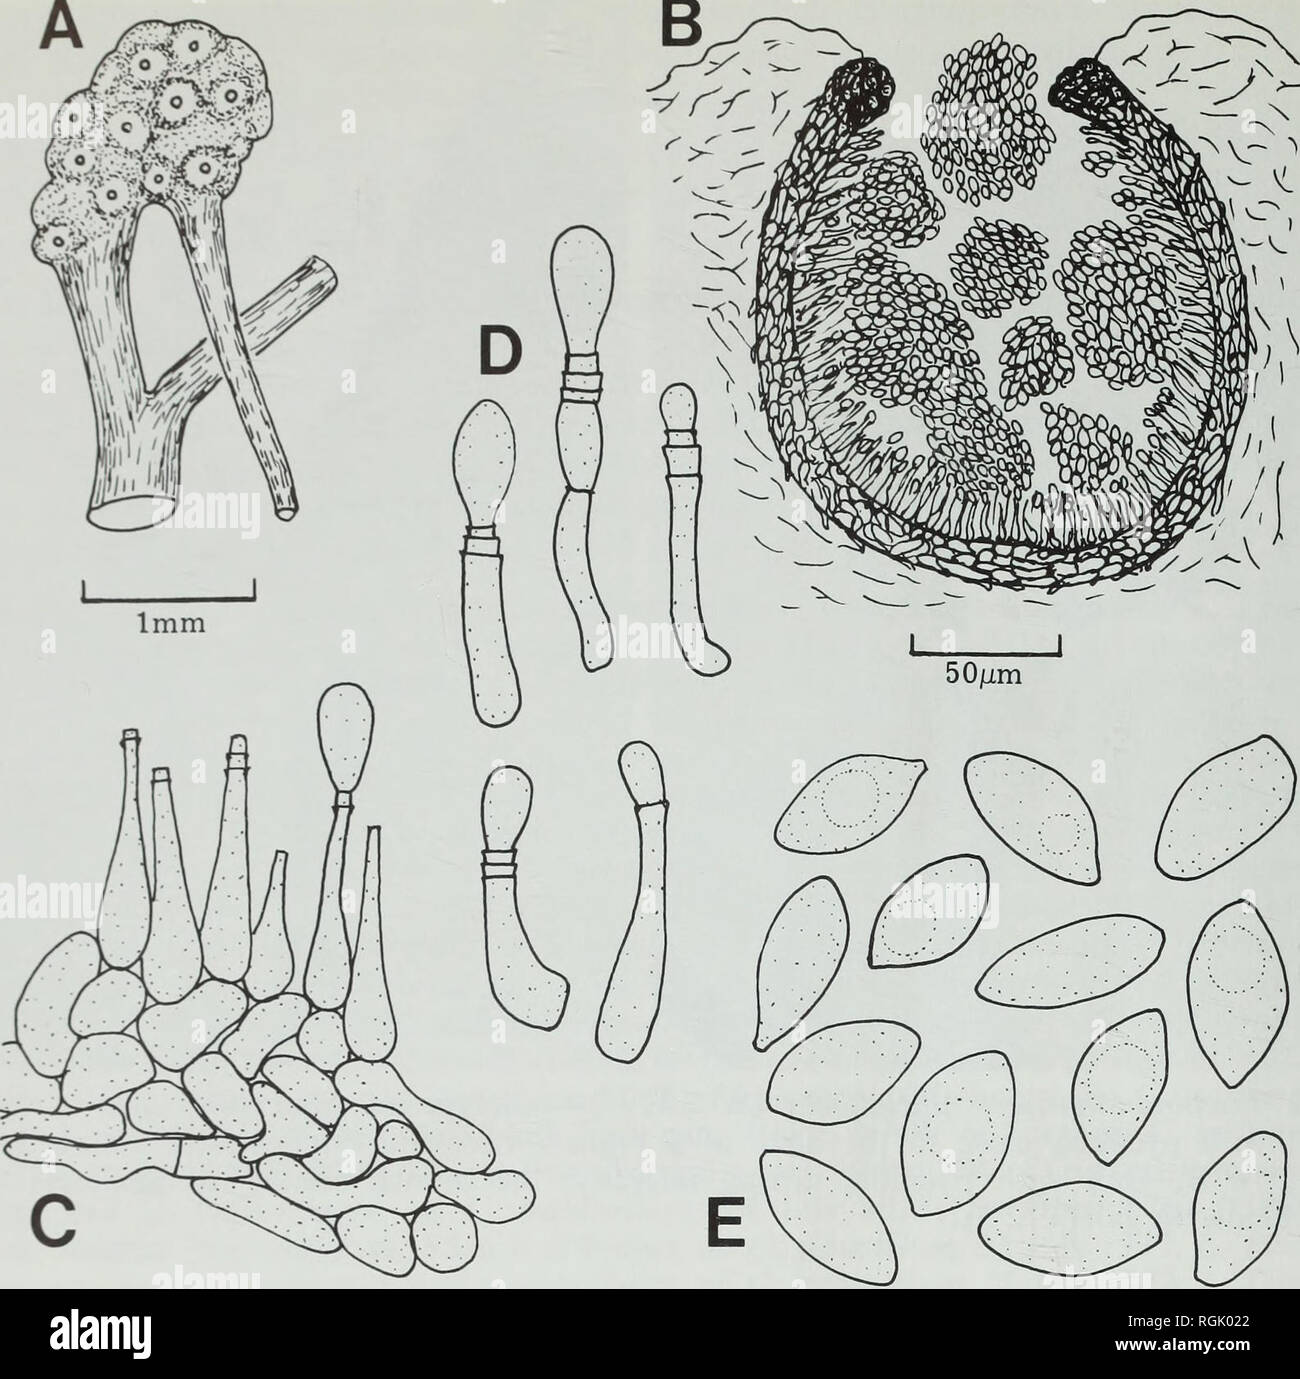 . Bulletin of the British Museum (Natural History). Botany; Botany. 12 D. L. HAWKSWORTH B. lOum Fiu. 3 Bachmanniomyces uncialicola (W 1929/2—holotype of Sirococcus lichenicola). A, Gall on geniculately deformed branch. B, Vertical section of pycnidium. C, Vertical section of pycnidial wall. D, Conidiogenous cells. E, Conidia. Exsiccatae*: Arnold, Lick. Exs. no. 1021a (BM!; sub Cladonia uncialis f. biuncialis).—Sandstede, Clad. Exs. no. 161 (BM!; sub C. uncialis), no. 162 (BM!, UPS!; sub C. uncialis).—Schaerer, Lich. If civ. no. 514 (not found on this number in BM but cited by Sandstede, 1931 : Stock Photo